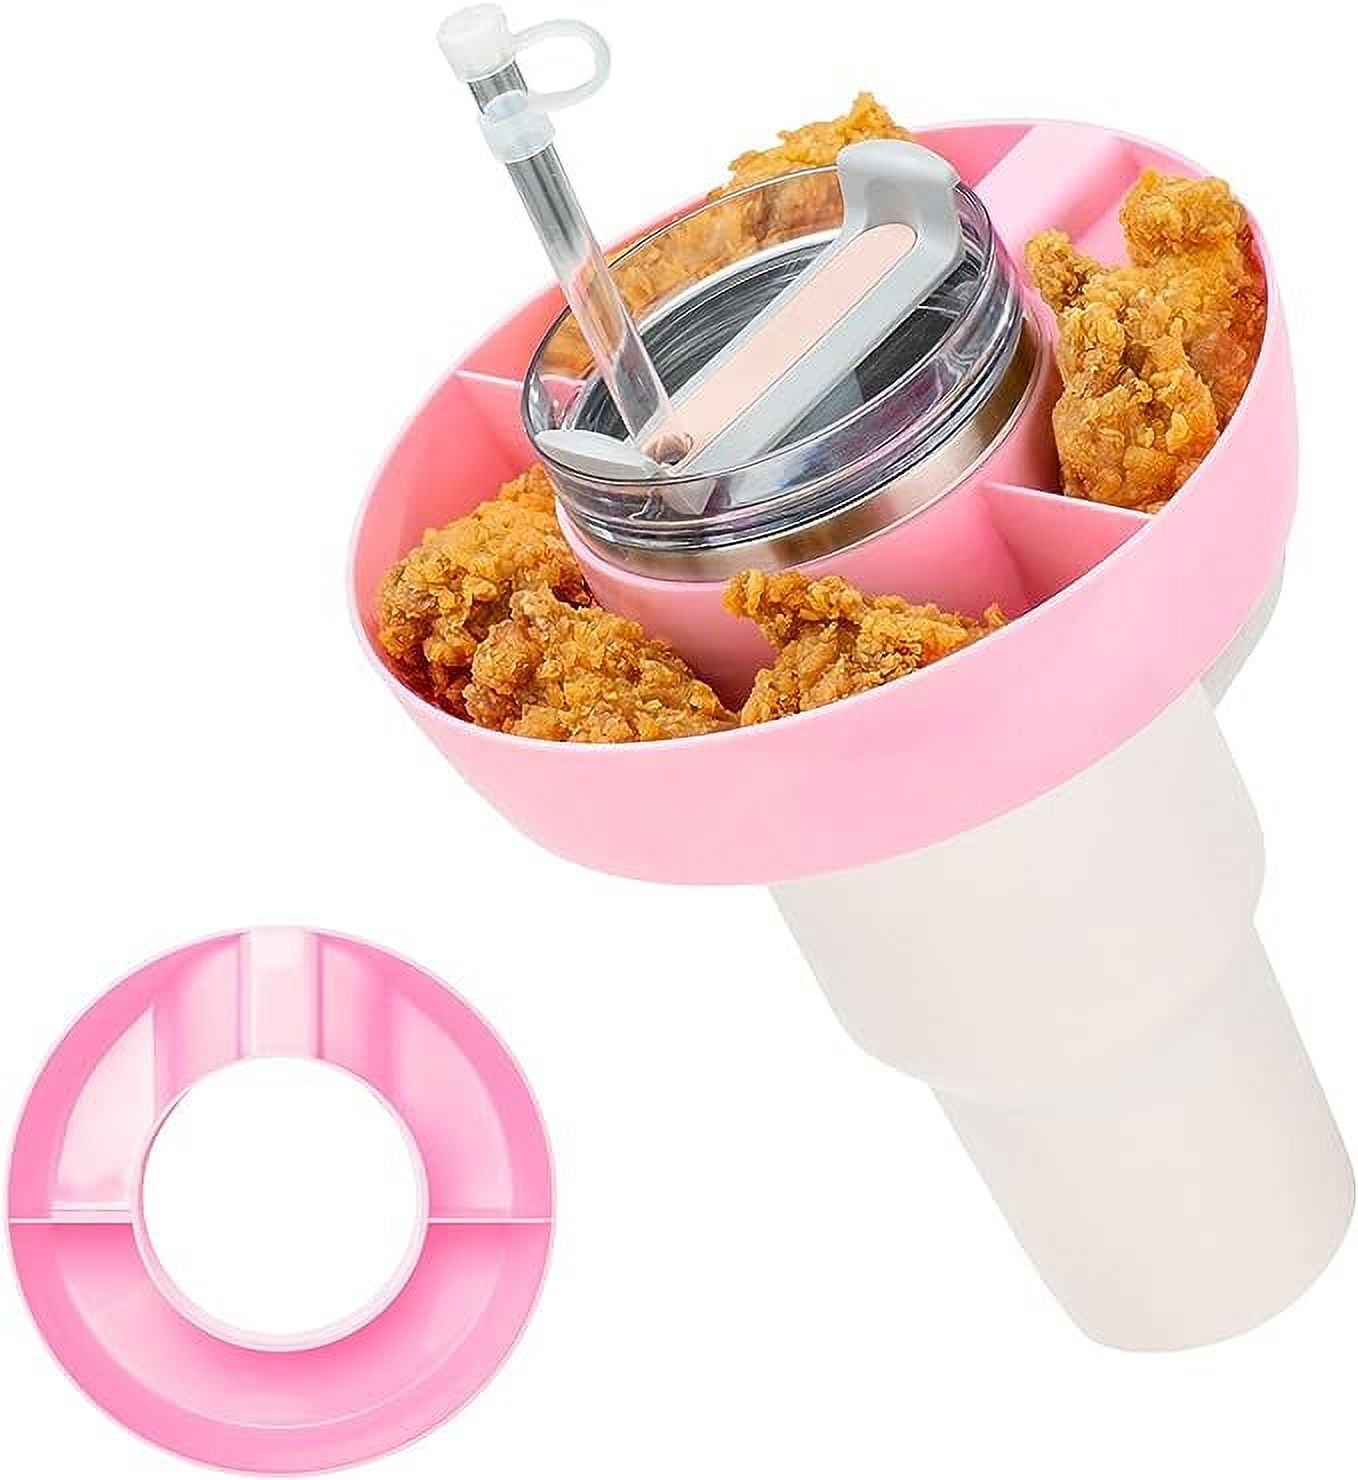 Snack Bowl For Stanley 40 Oz Tumbler, 5 Parts Tumbler Snack Tray